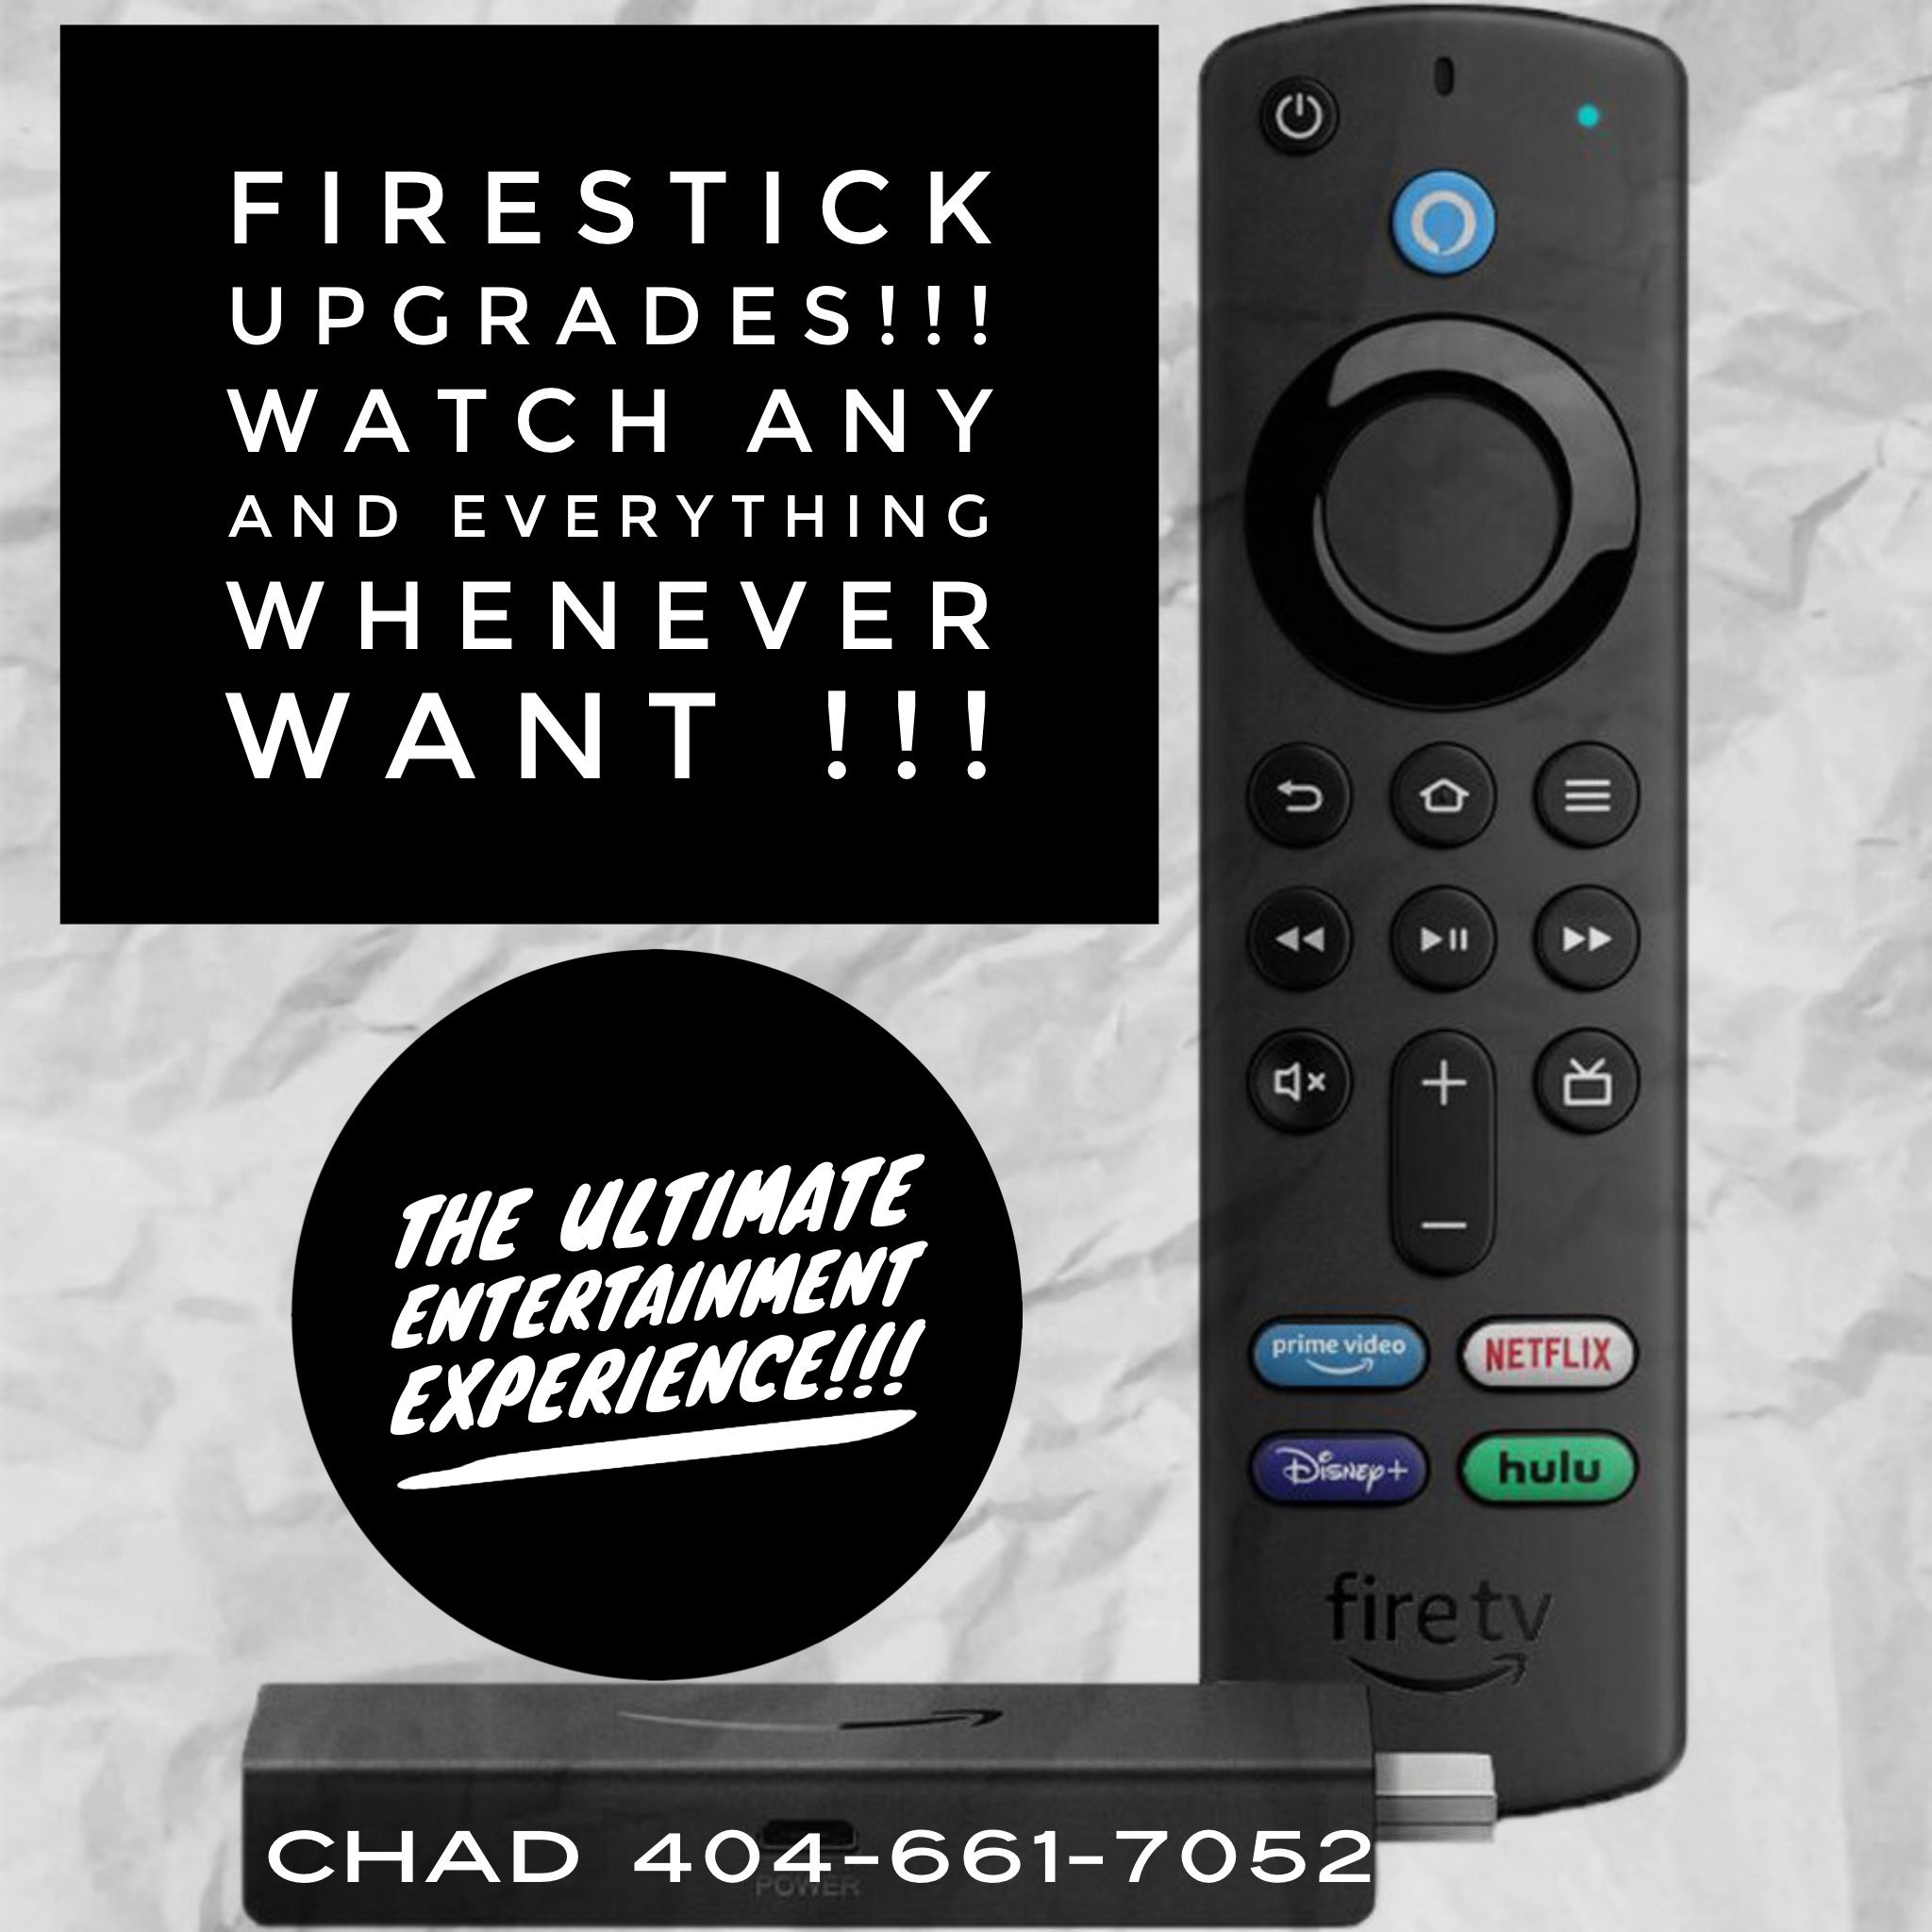 Upgrades for any fire TV devices! Watch any and everything whenever you want! You’ll love these enhancement’s!